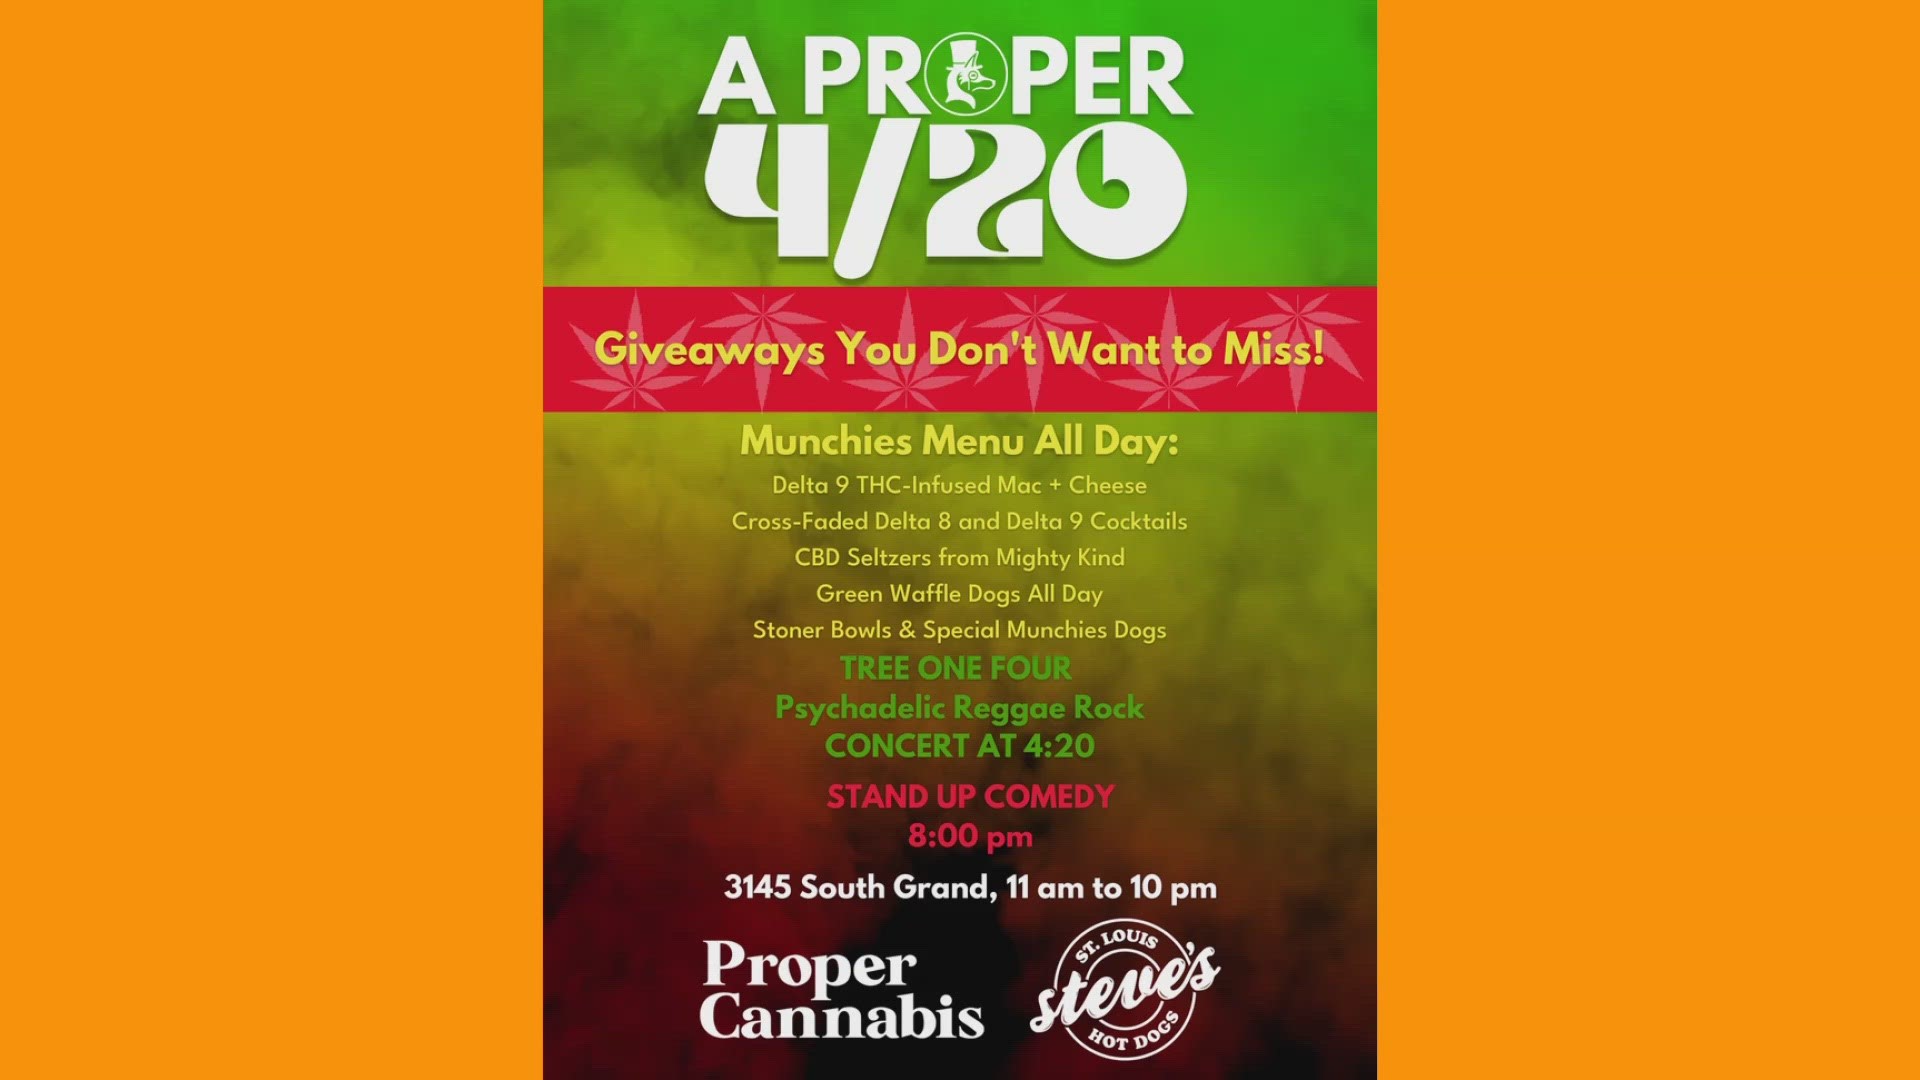 The cannabis-themed celebration with feature an all-day munchies menu, music and giveaways. Celebrations go from 11 a.m.- 10 p.m. on 4/20.